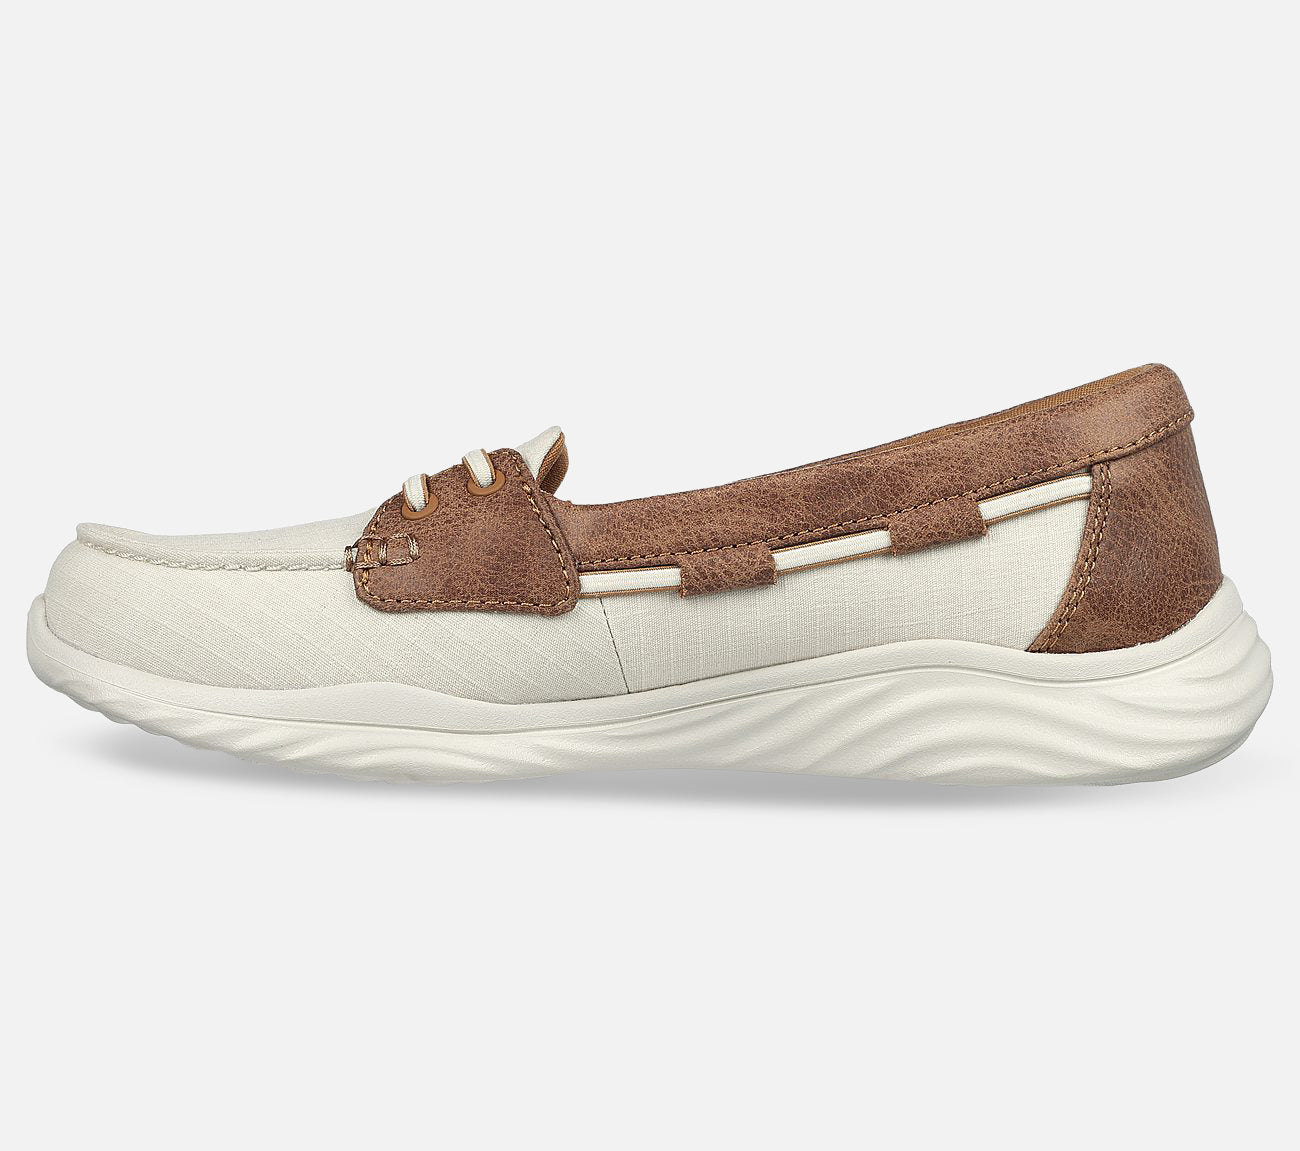 On-The-Go Ideal - Set Sail Shoe Skechers